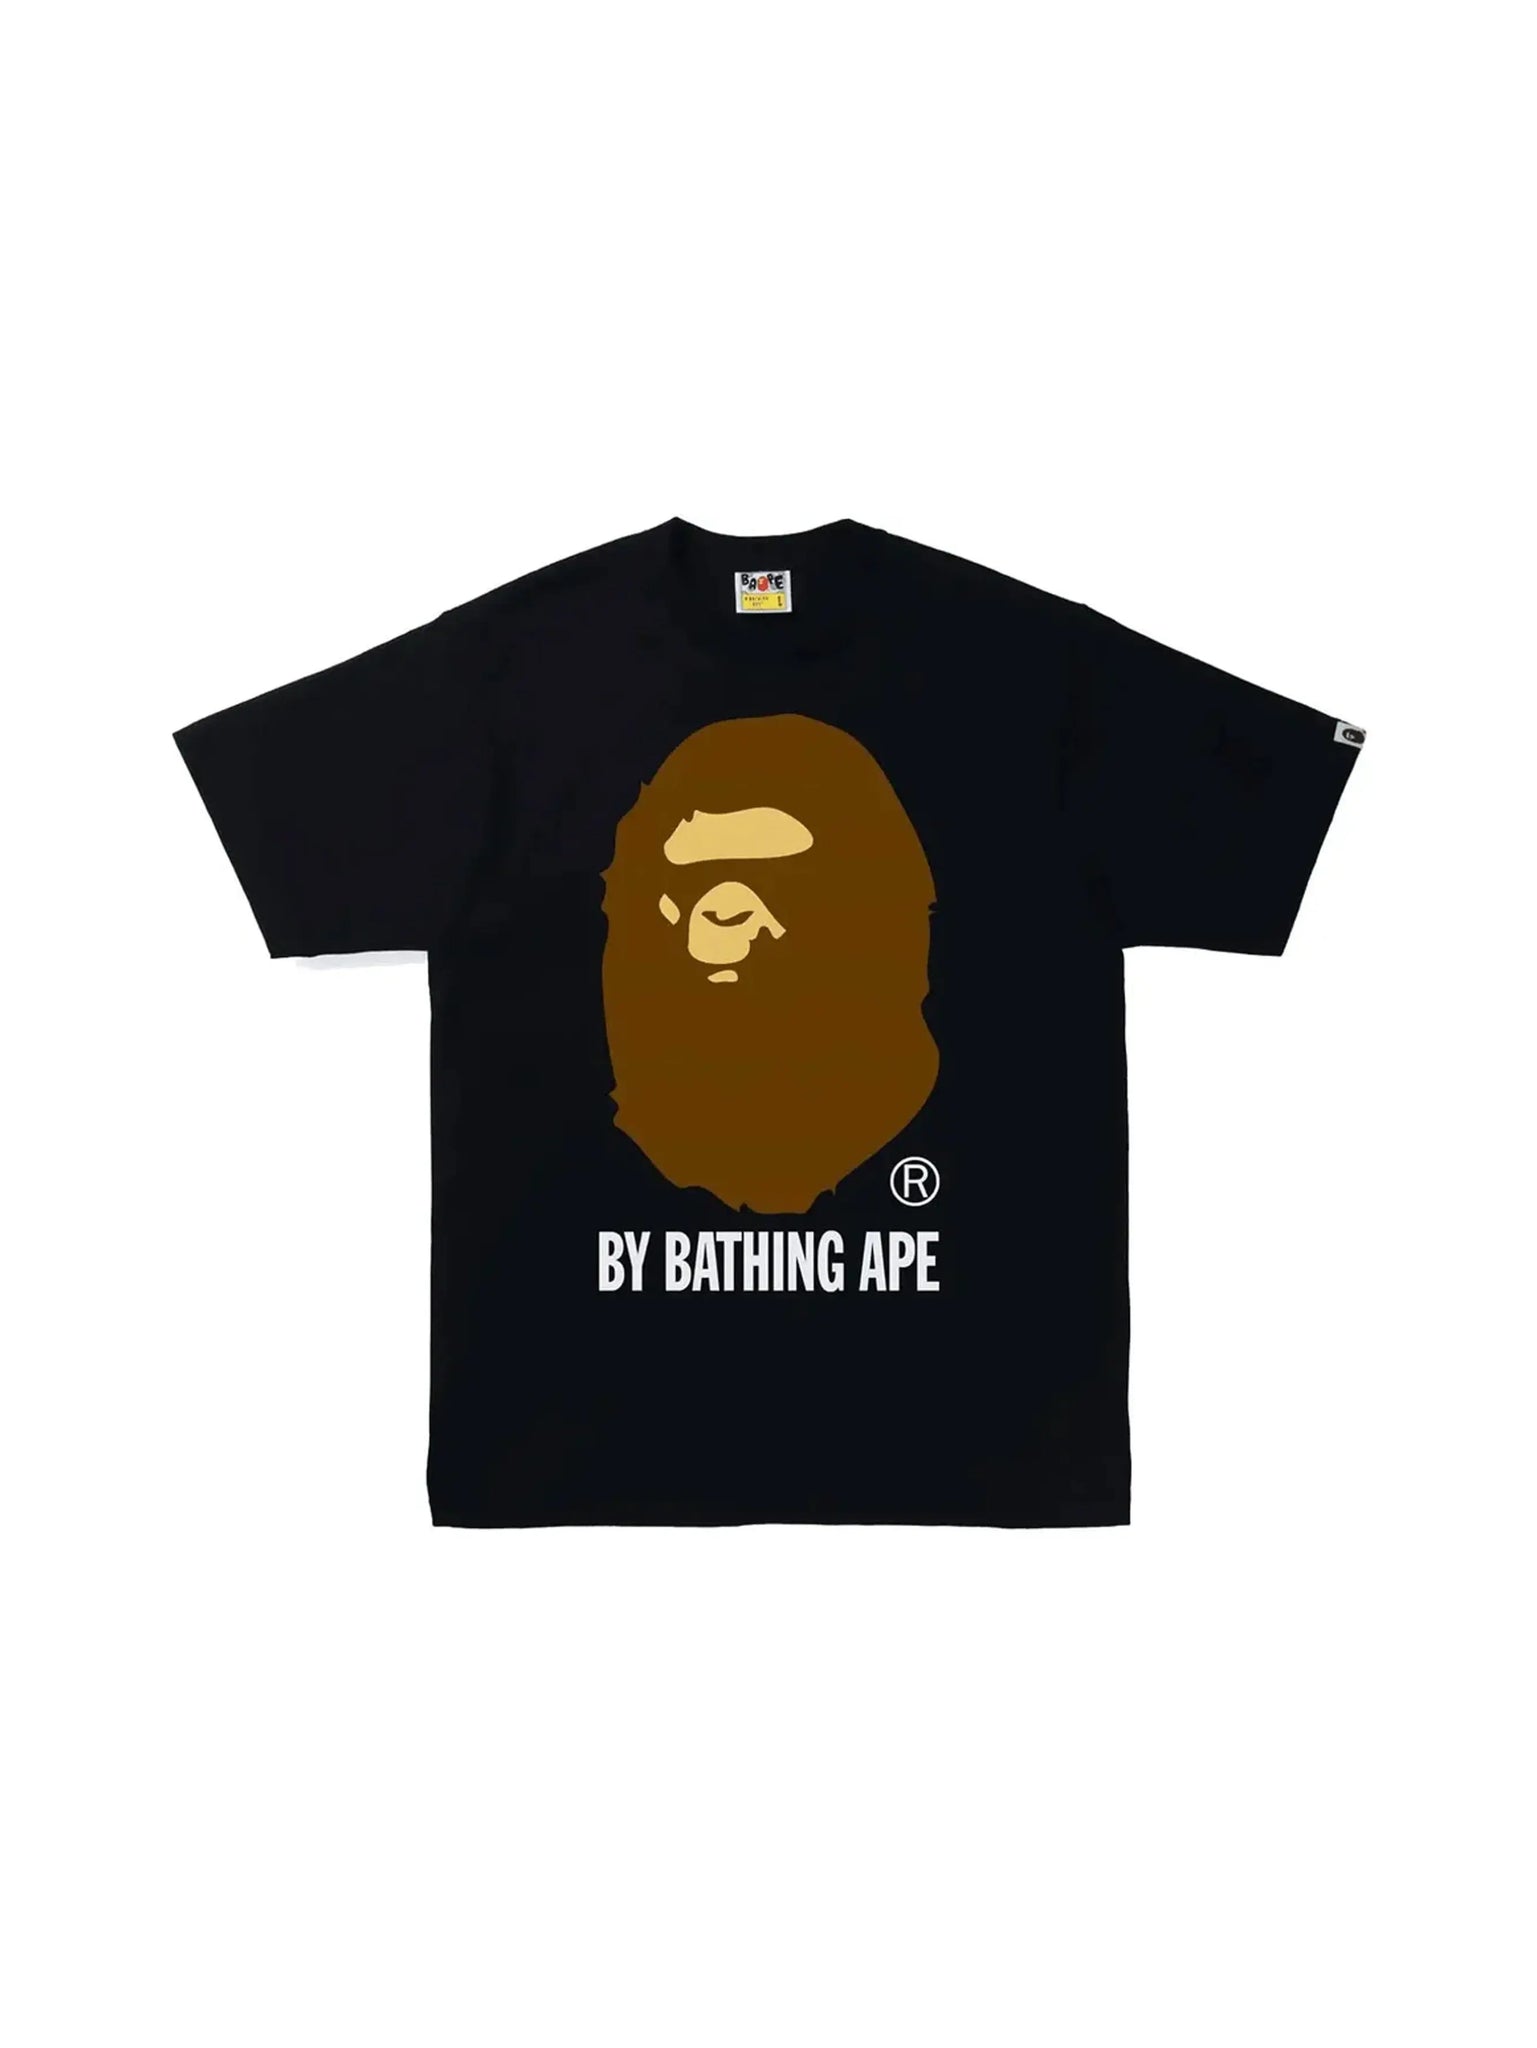 BAPE By Bathing Ape Tee Black in Auckland, New Zealand - Shop name